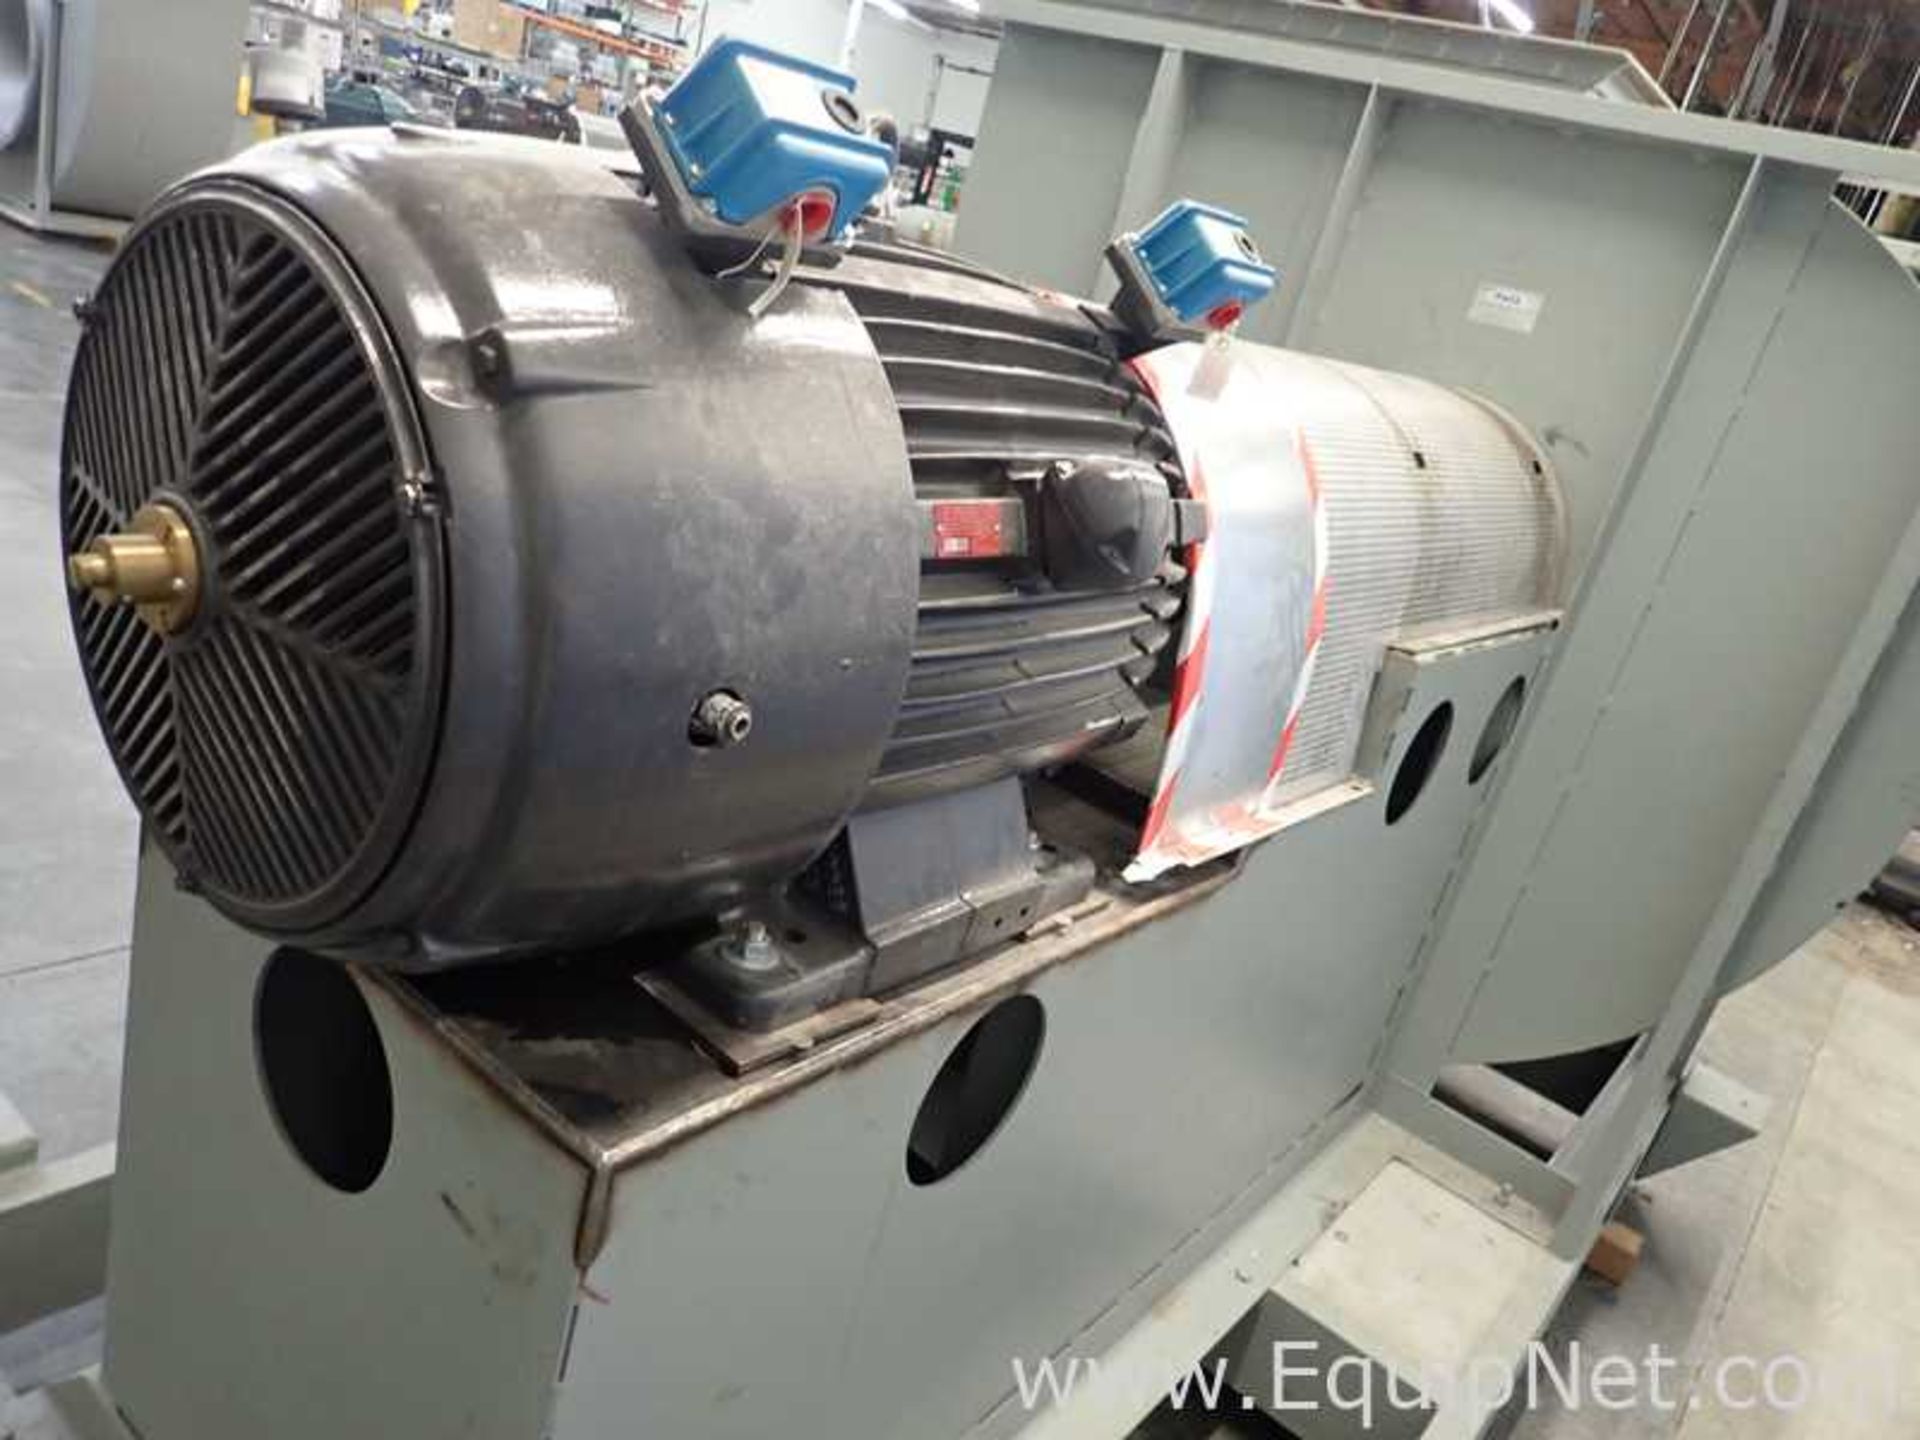 Pace Company CL 44ARRG8 General Air Handler Fan and Motor - Image 16 of 47